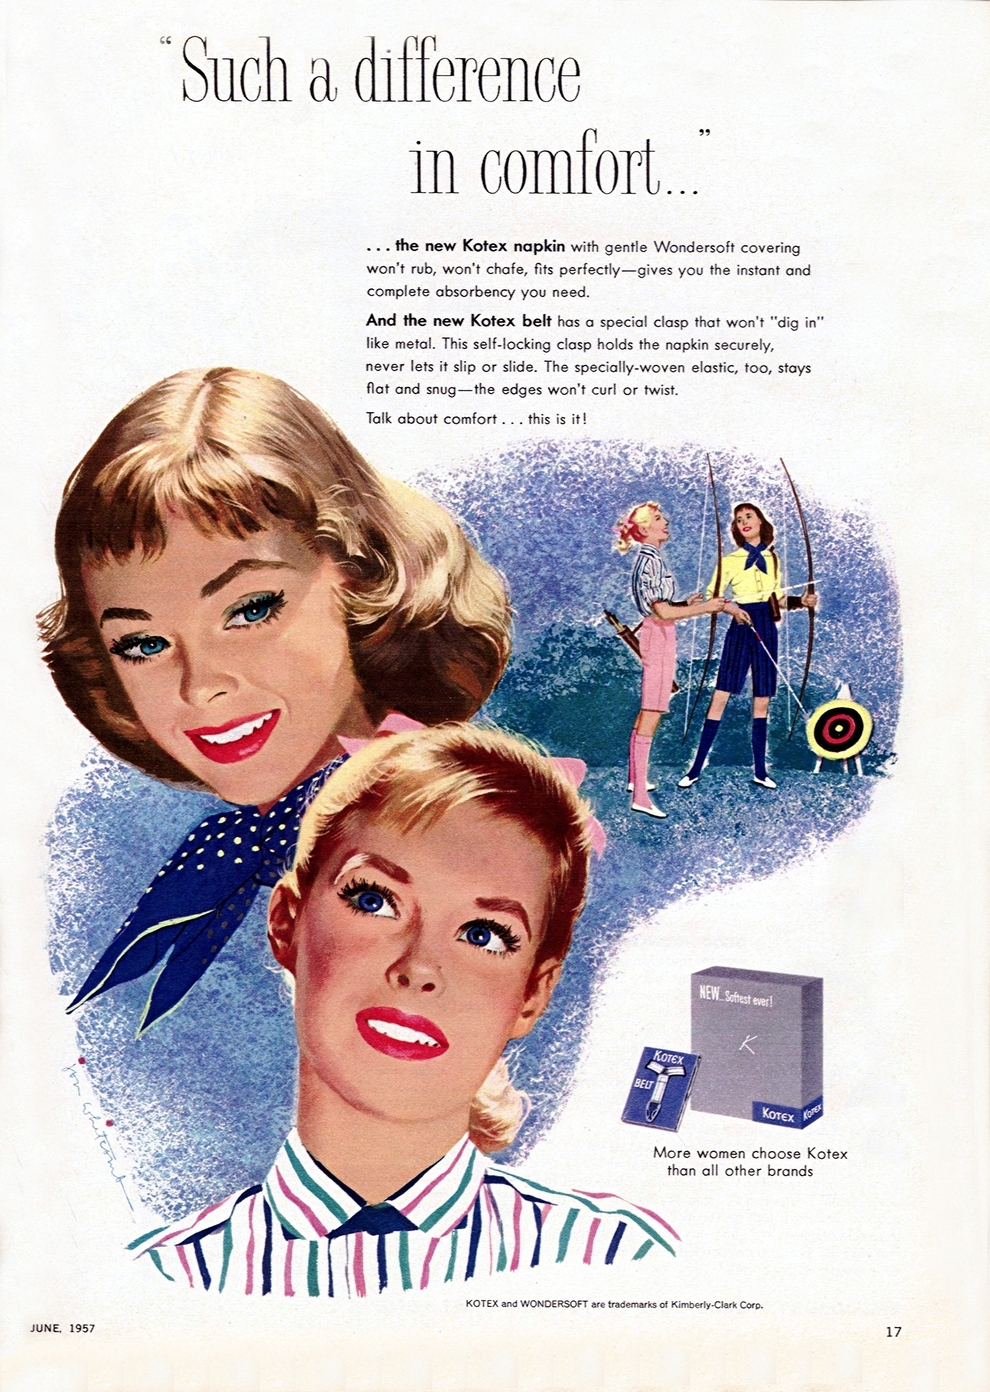 Glamorous Kotex Ads From The 1950s ~ vintage everyday